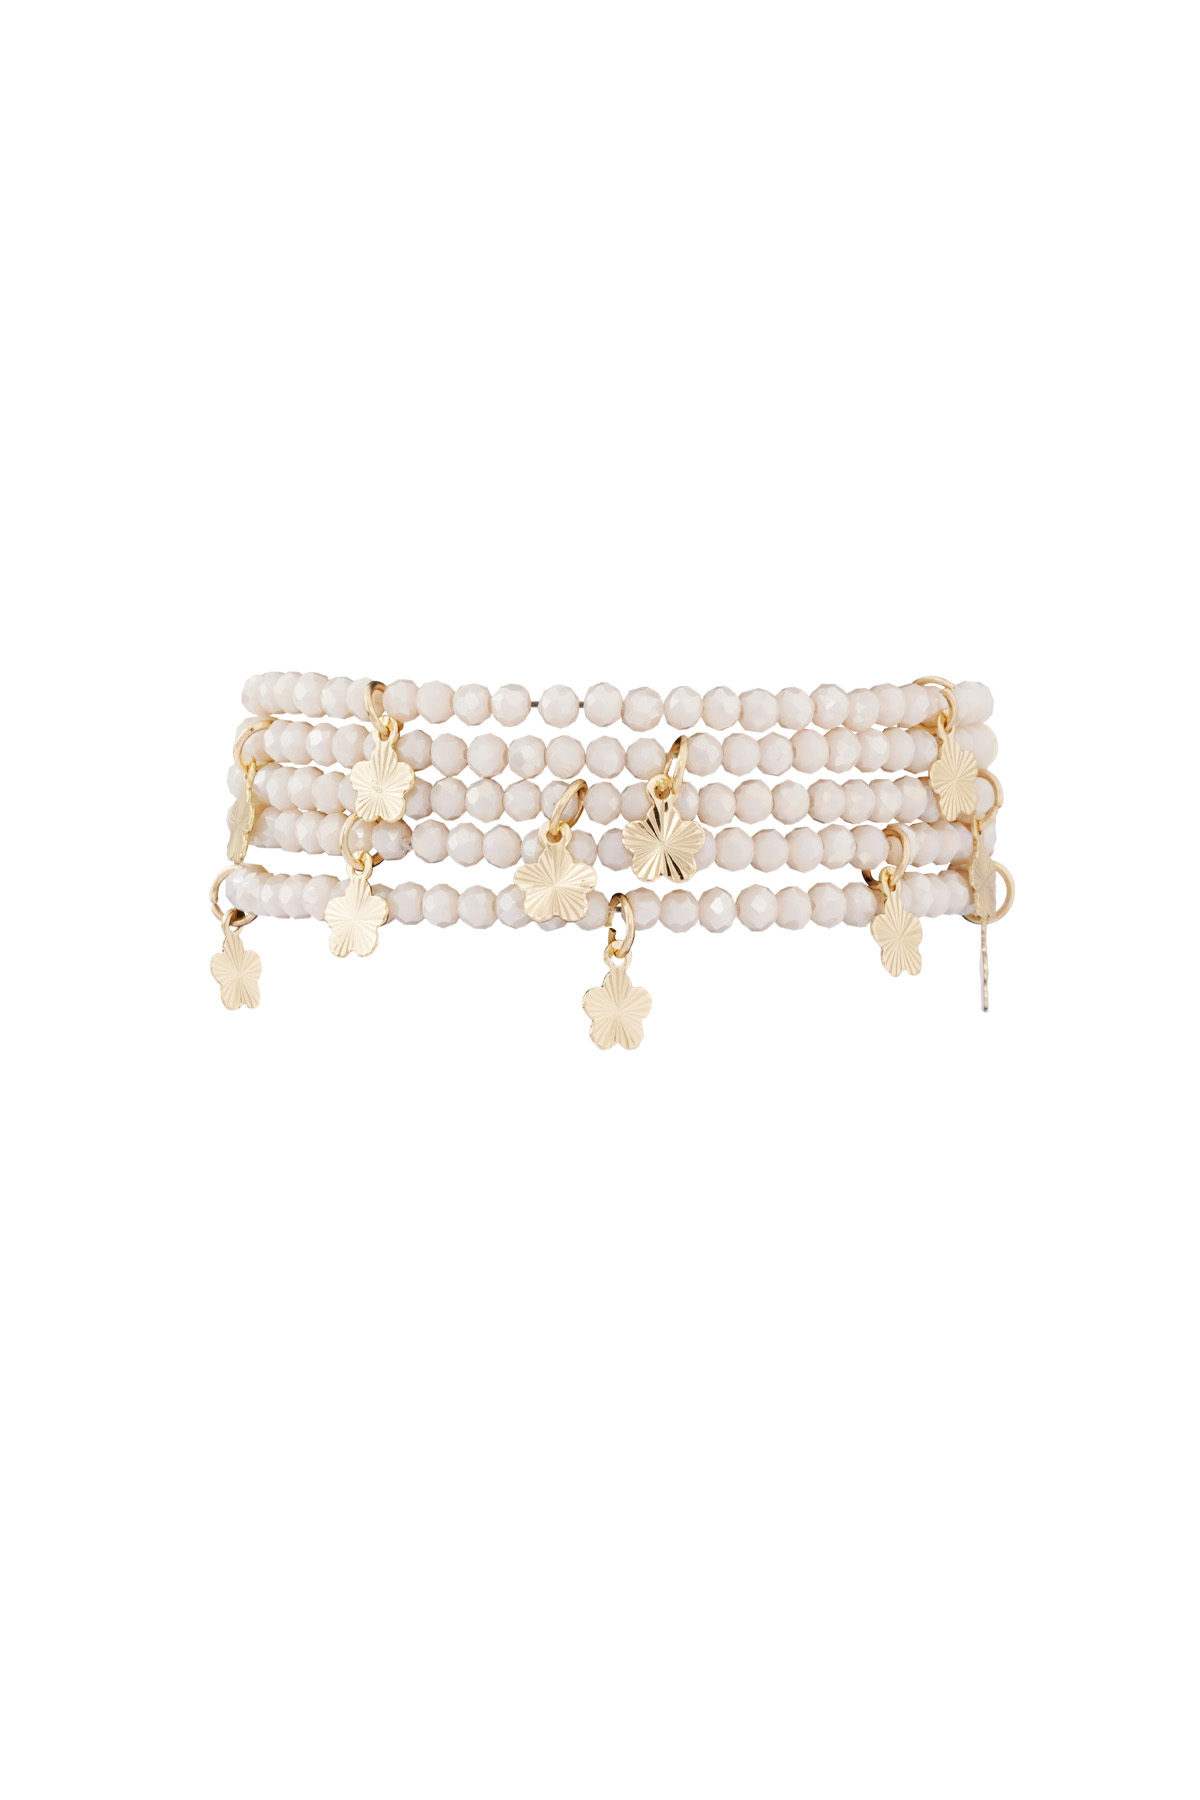 Double bracelet with flower charms - beige/gold